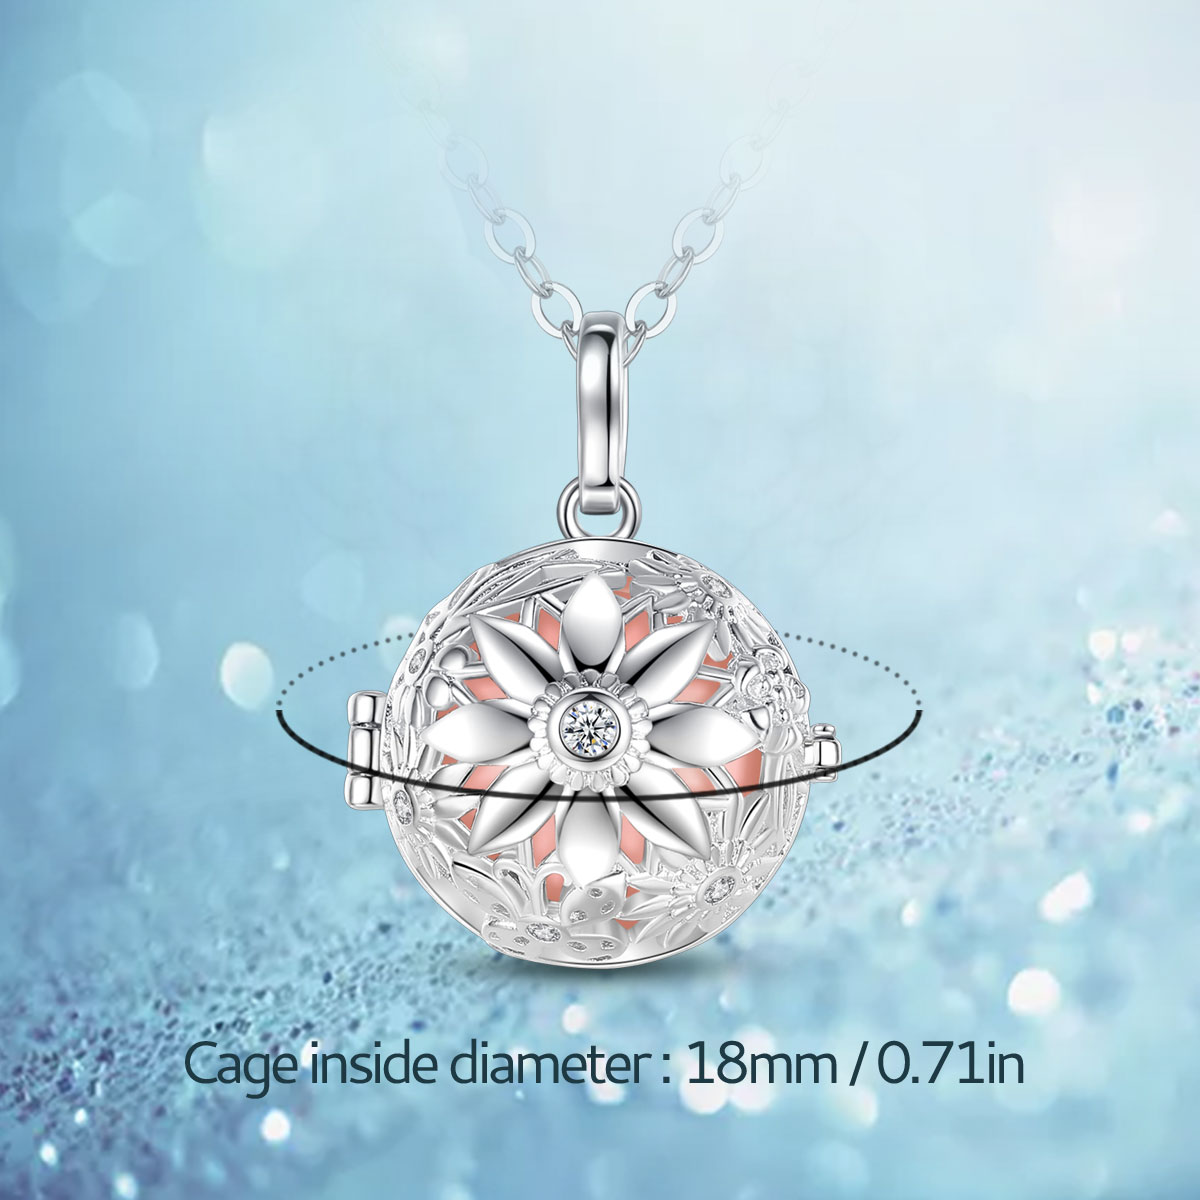 Merryshine Jewelry Harmony Colorful Ball Cage Pendant Necklace for Pregnancy